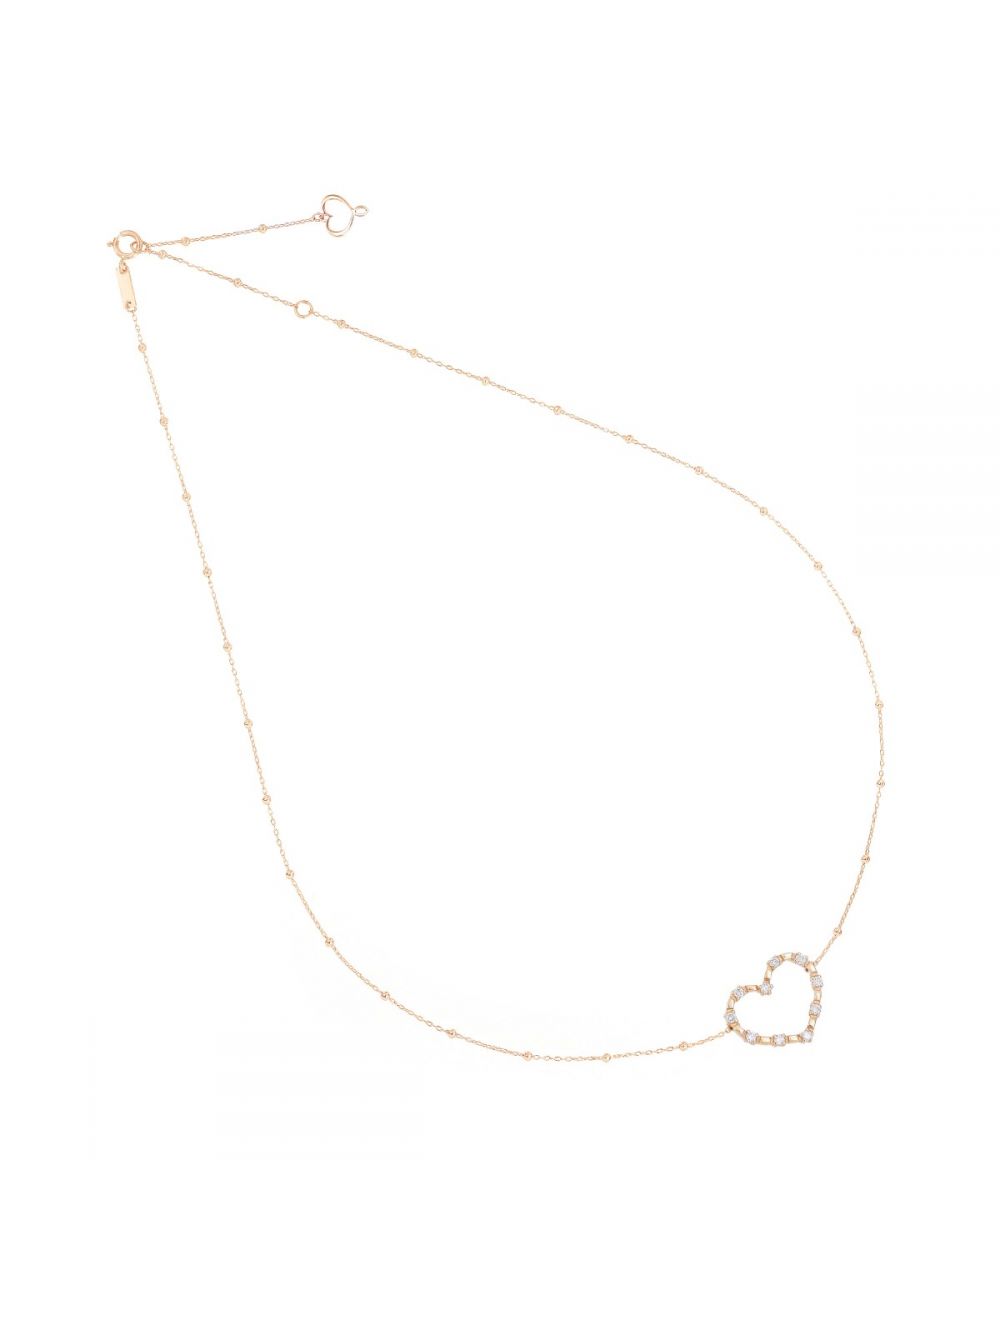 Maman et Sophie Rose Gold Necklace and Big Heart With Diamonds